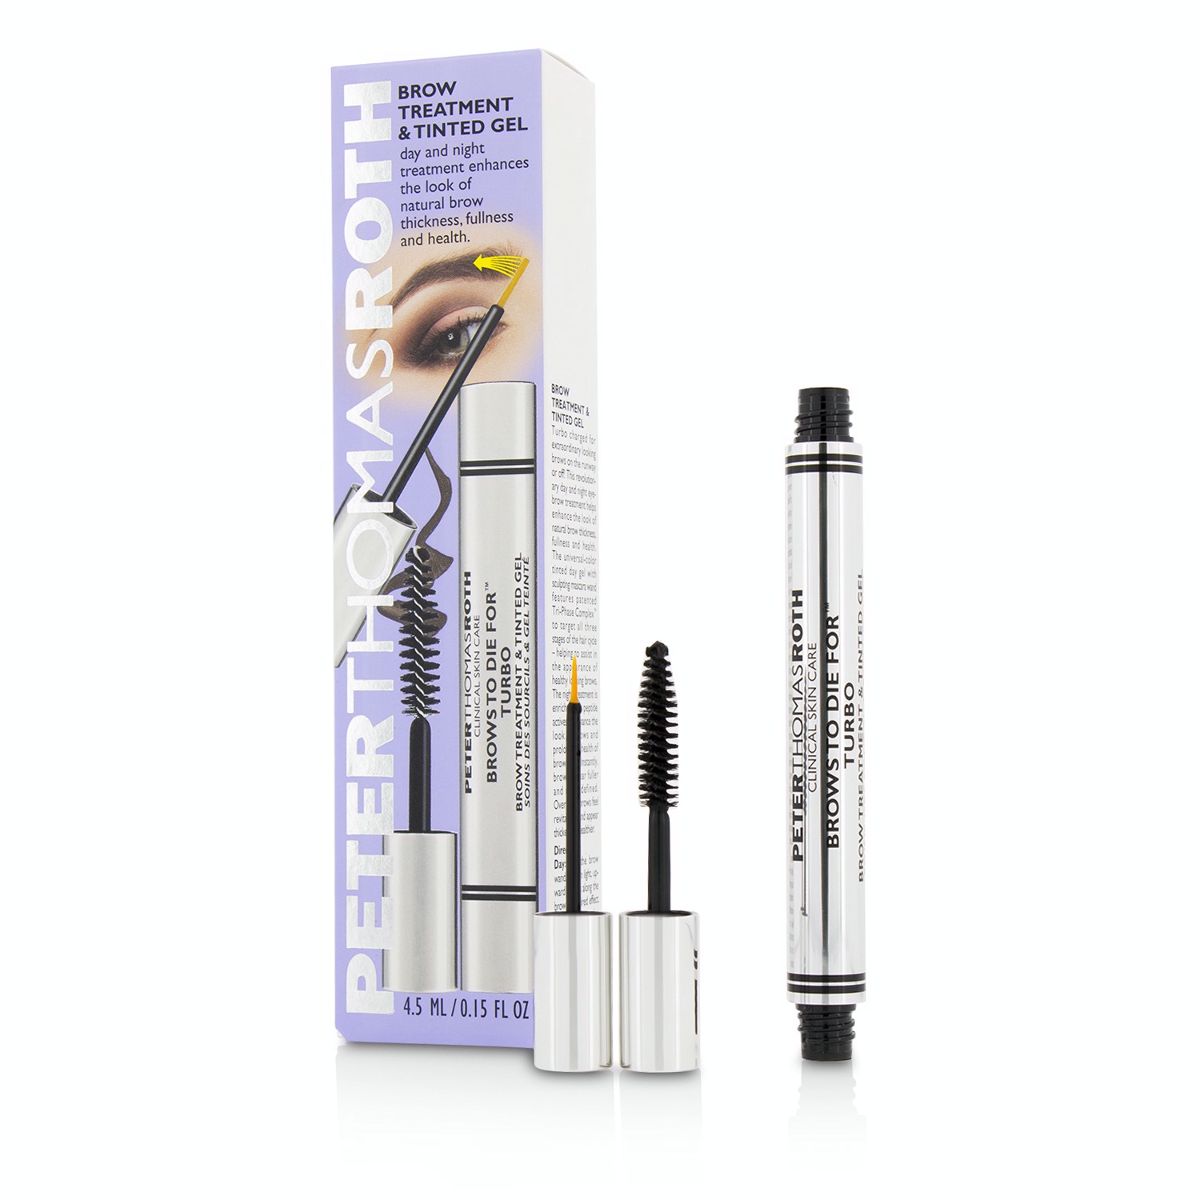 Brows To Die For Turbo Brow Treatment  Tinted Gel Peter Thomas Roth Image